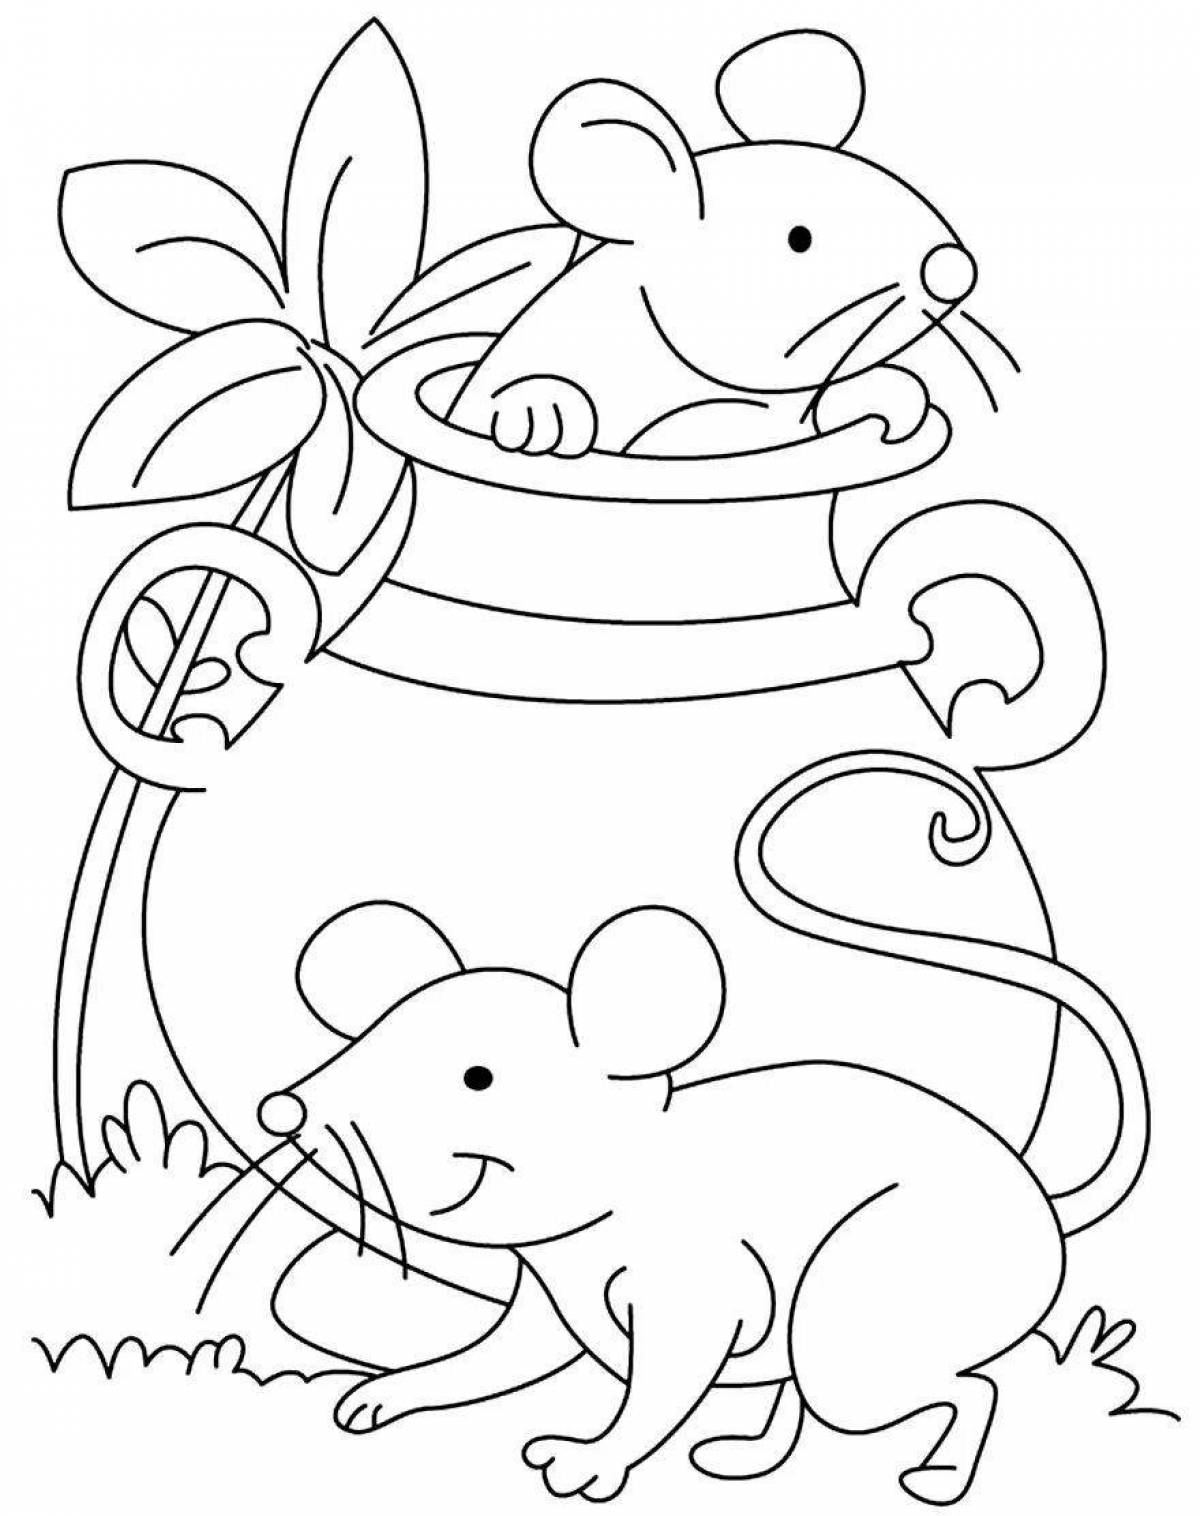 Colorful mouse coloring page for 4-5 year olds